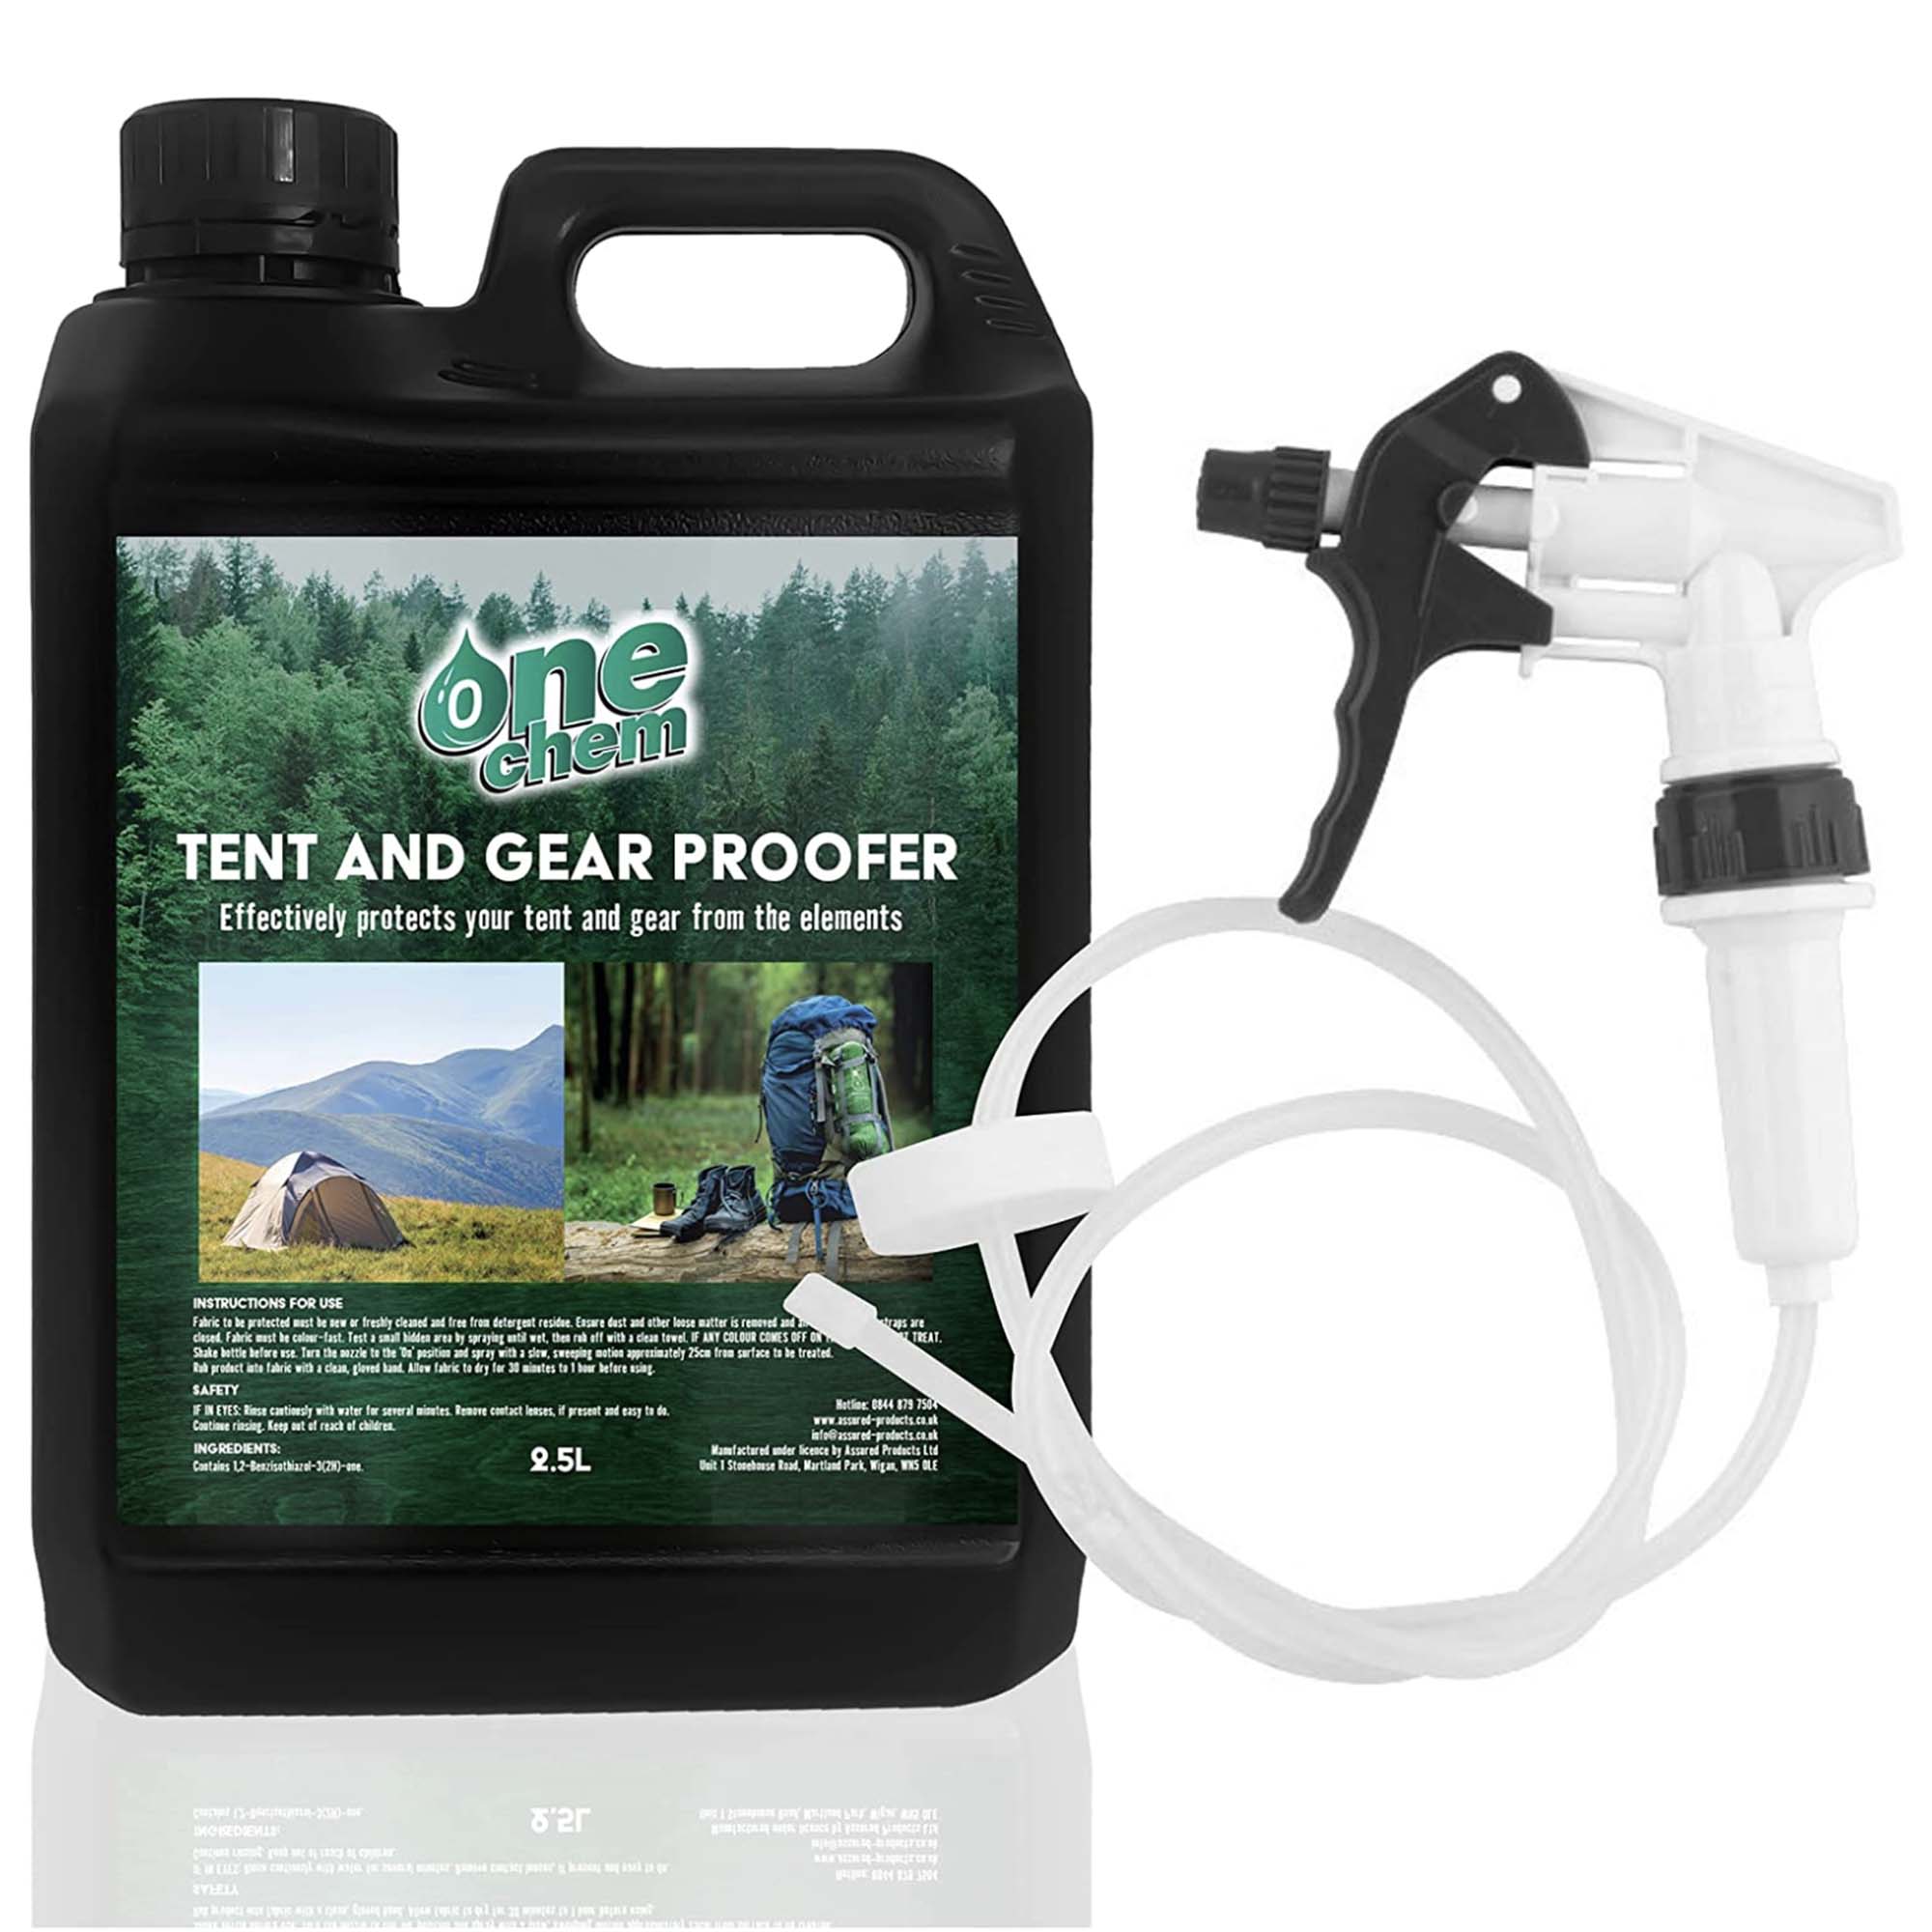 One Chem Tent and Gear Proofer 2.5L (with Long Hose Trigger)